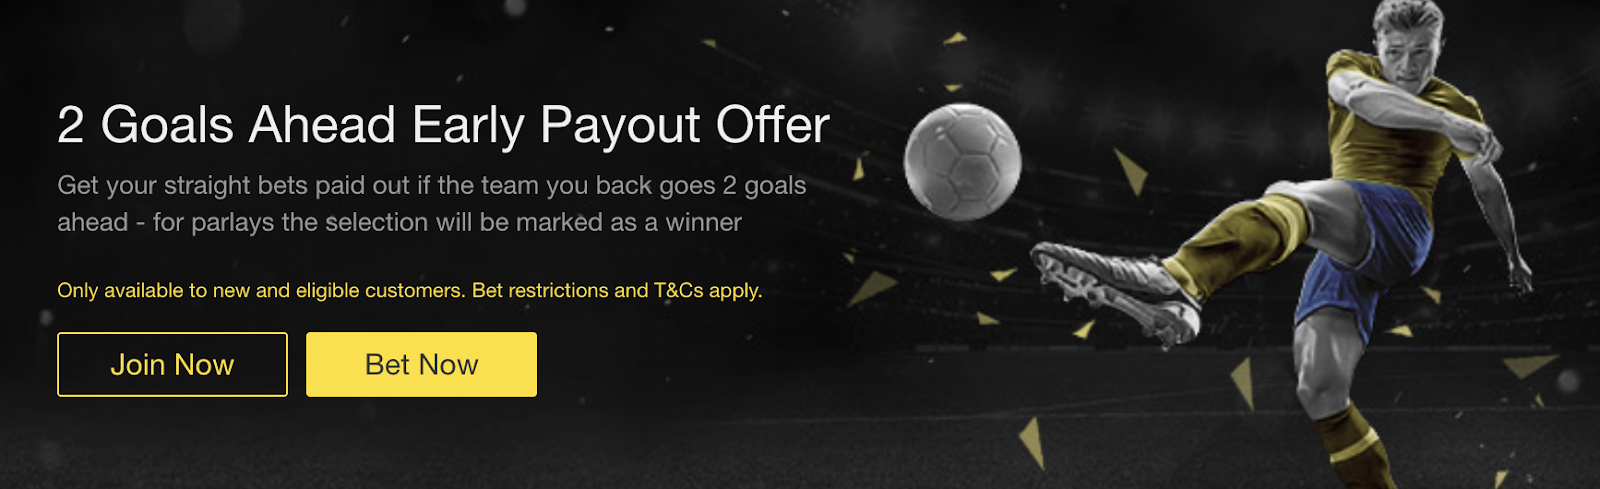 bet365 Sportsbook - 2 Goals Ahead Payout Offer